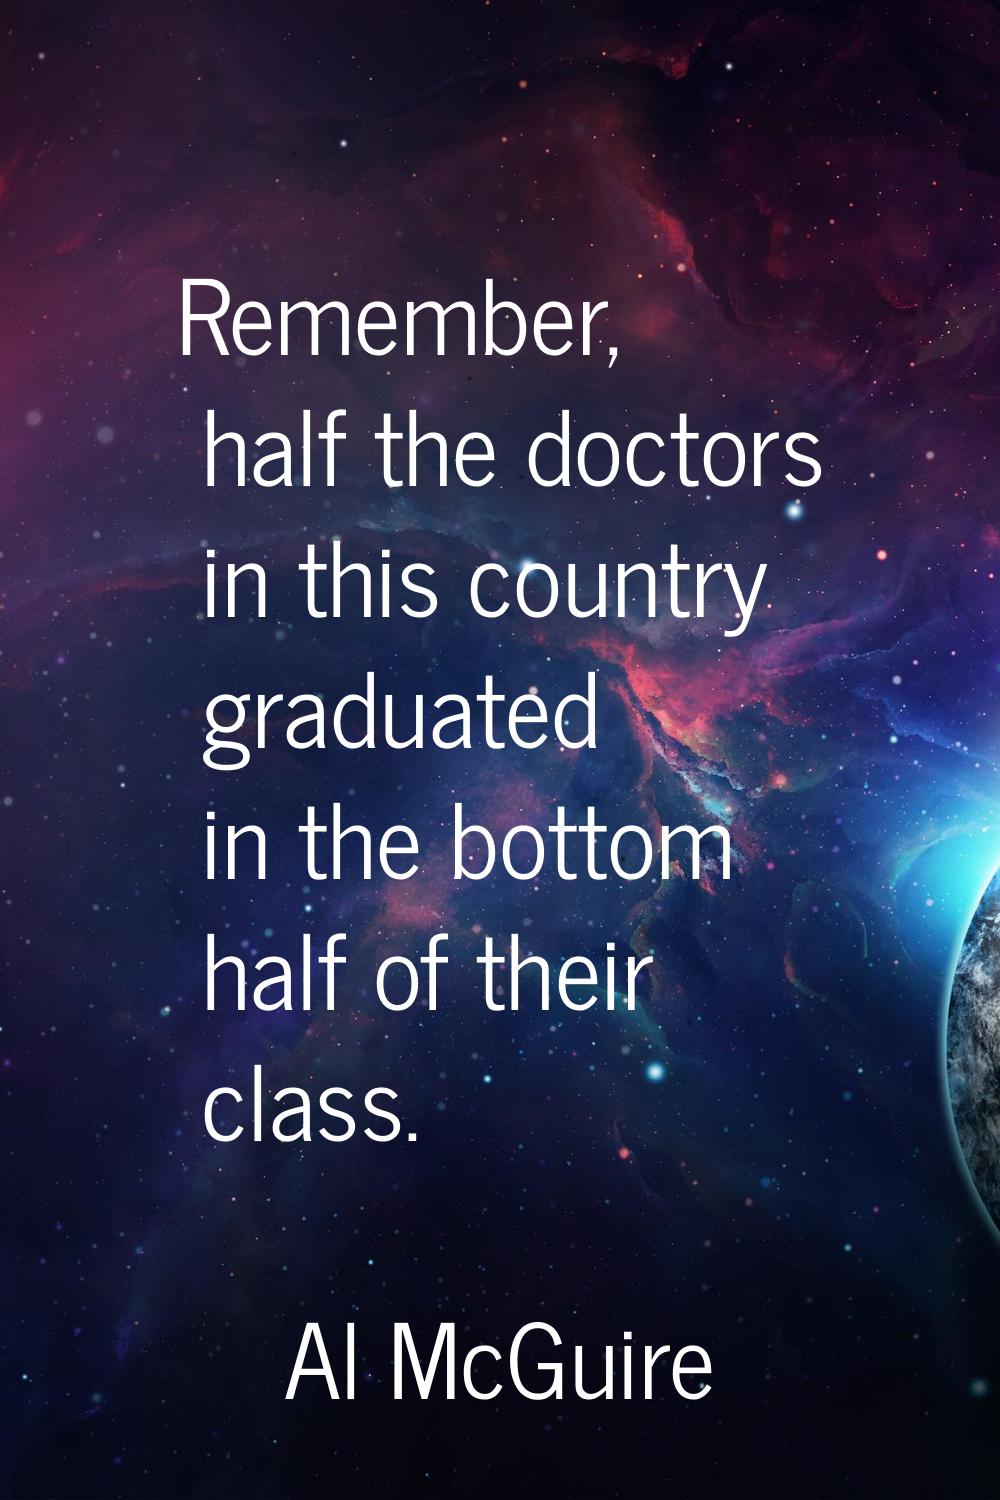 Remember, half the doctors in this country graduated in the bottom half of their class.